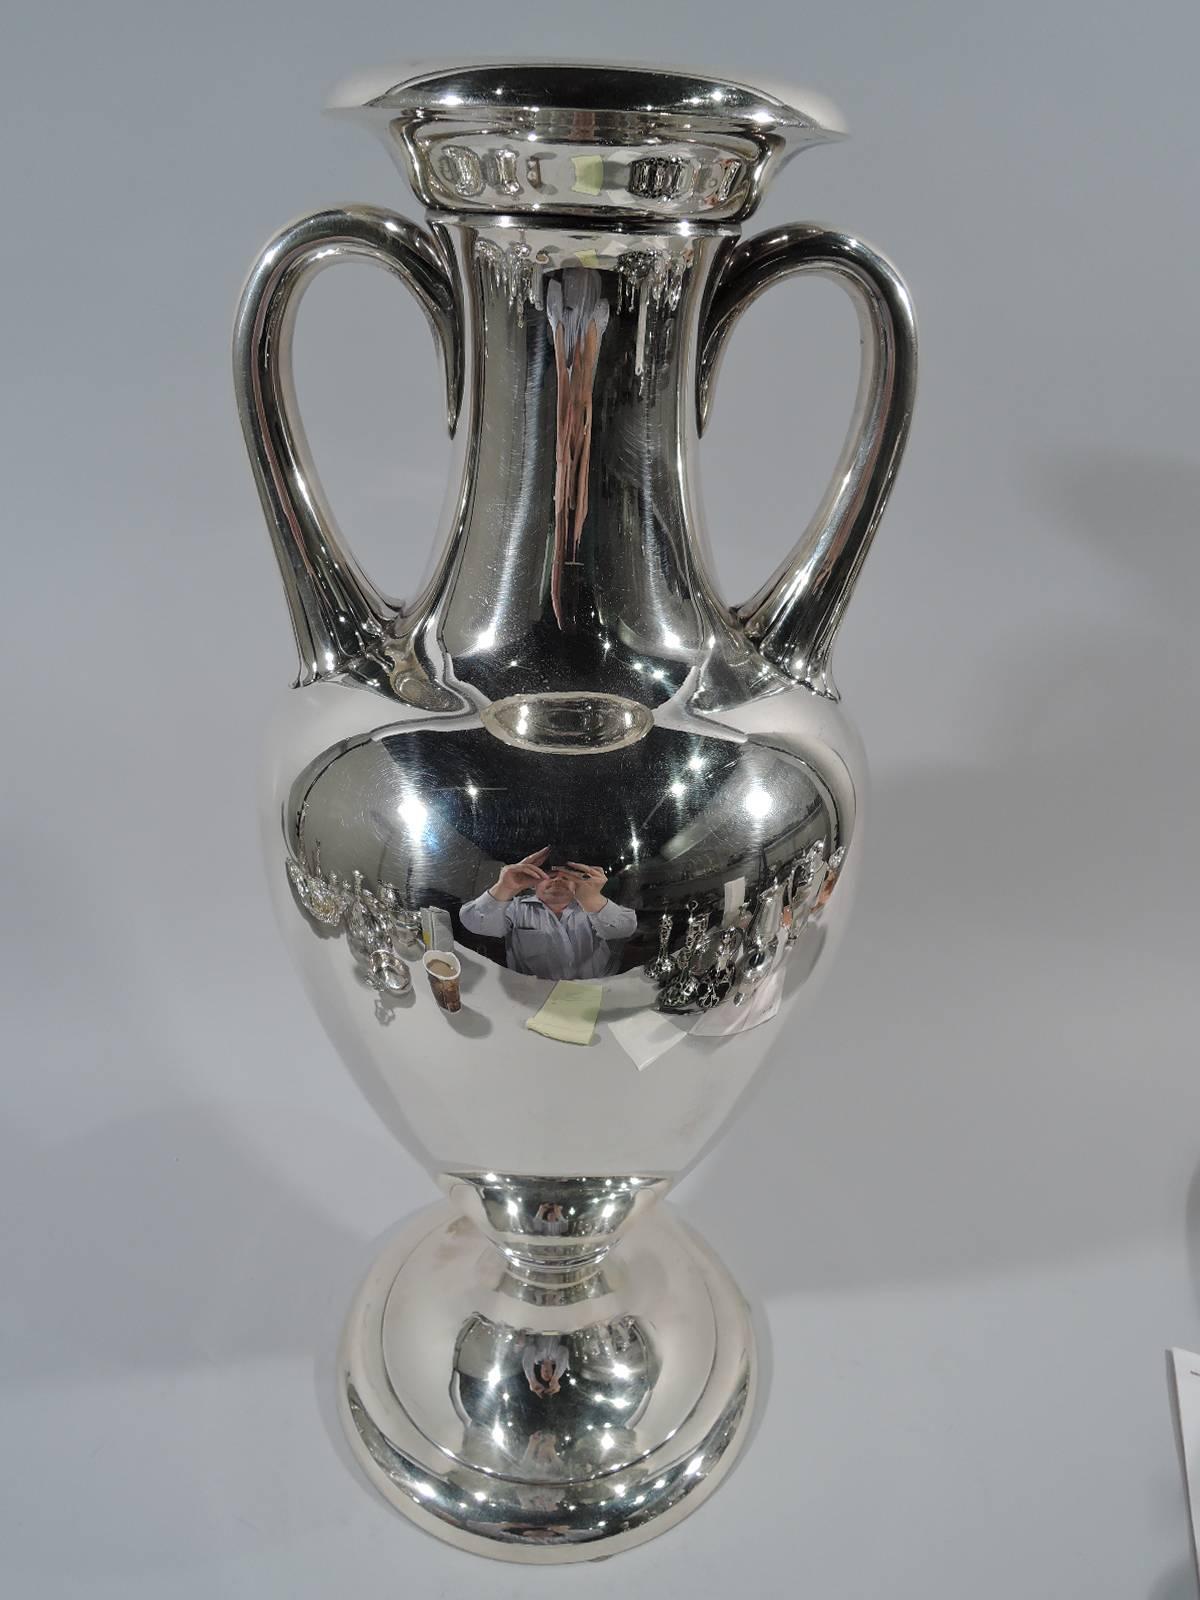 Tall and heavy sterling silver trophy cup. Made by Tiffany & Co. in New York, ca 1905. Traditional Amphora vase. Handles have scalloped petal mounts. Bottom has reeded band. Substantial with lots of room for engraving. Hallmark includes pattern